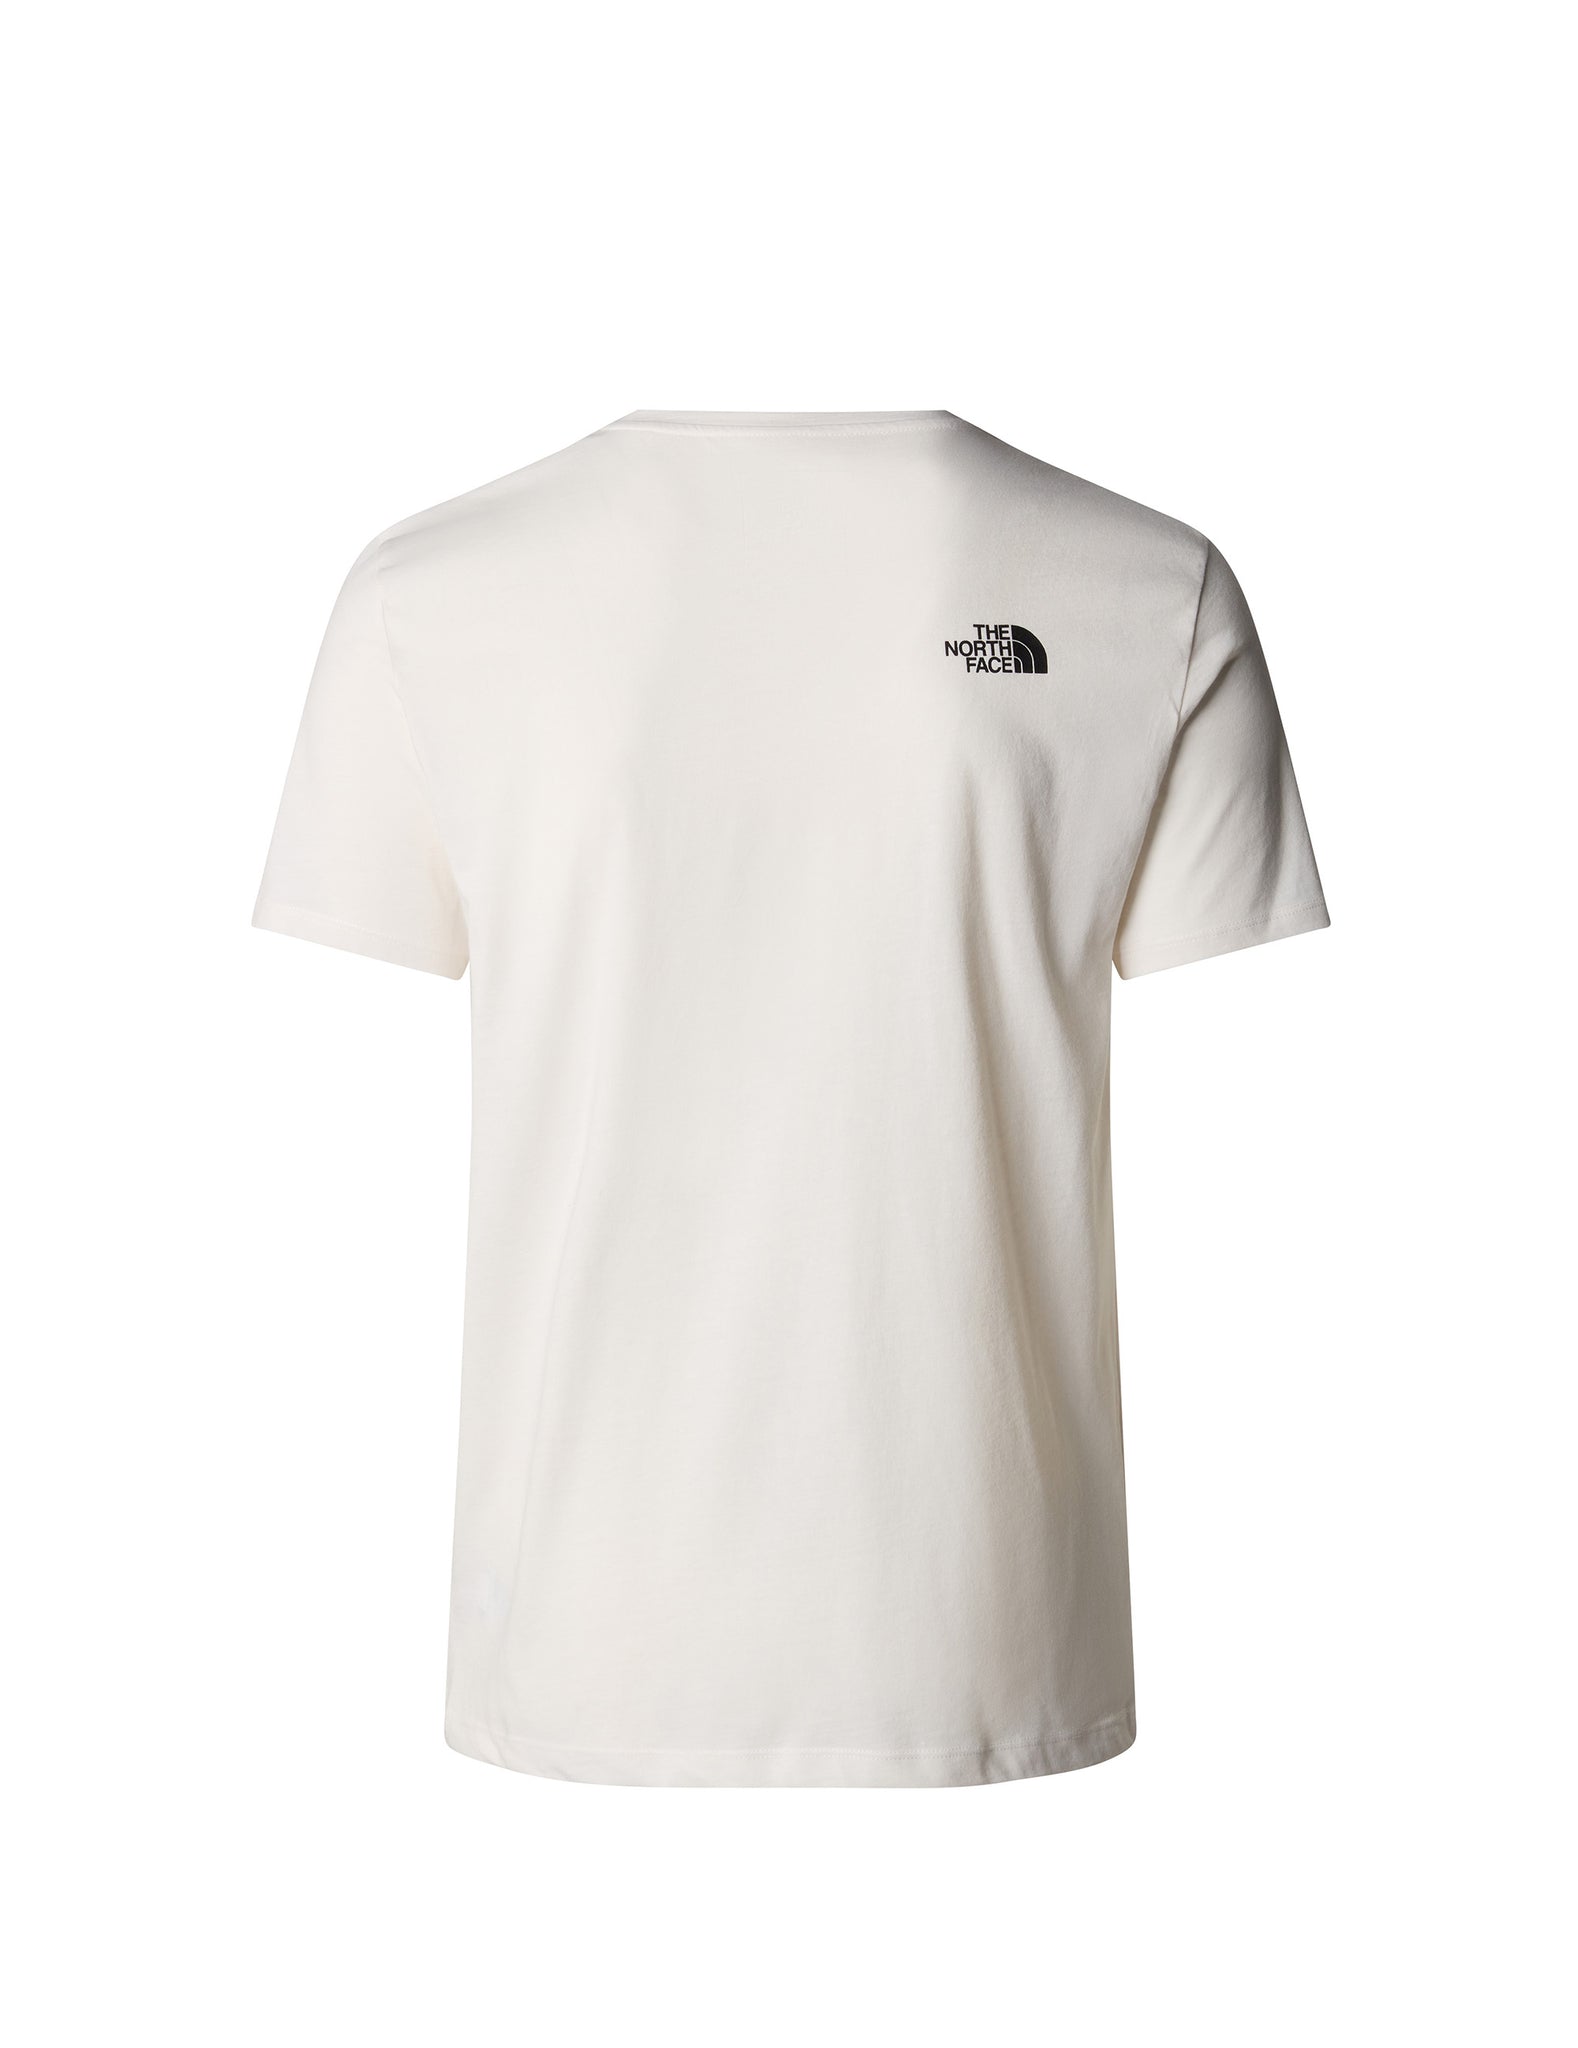 The North Face Men'S Foundation Graphics Tee White Men